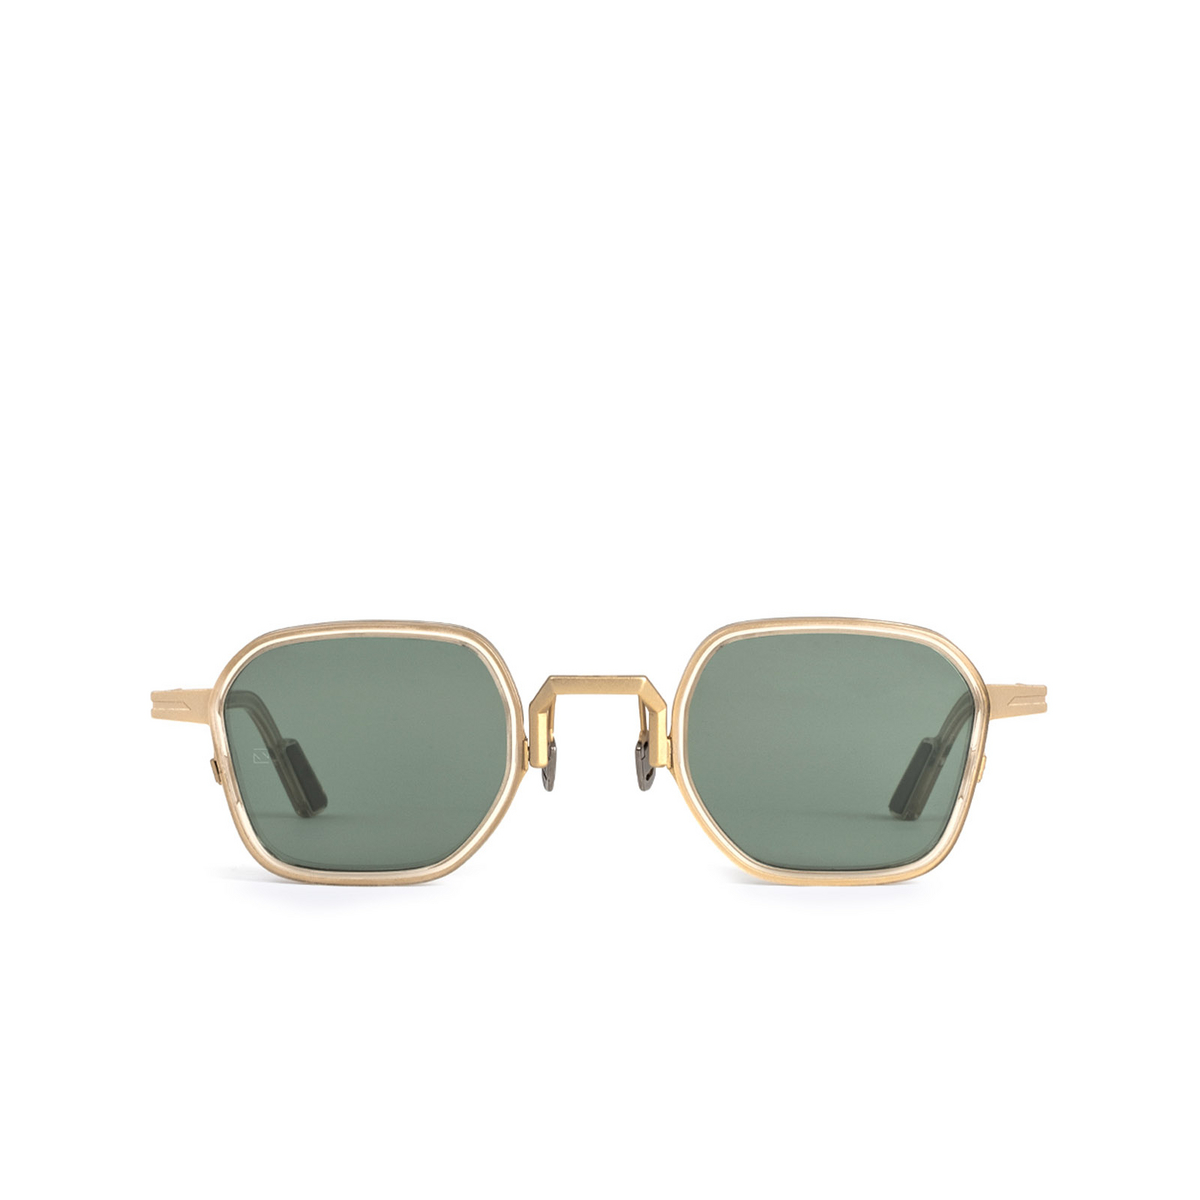 Movitra RICHARD Sunglasses GOLD SAND GREEN Light Gold & Crystal Sand - front view